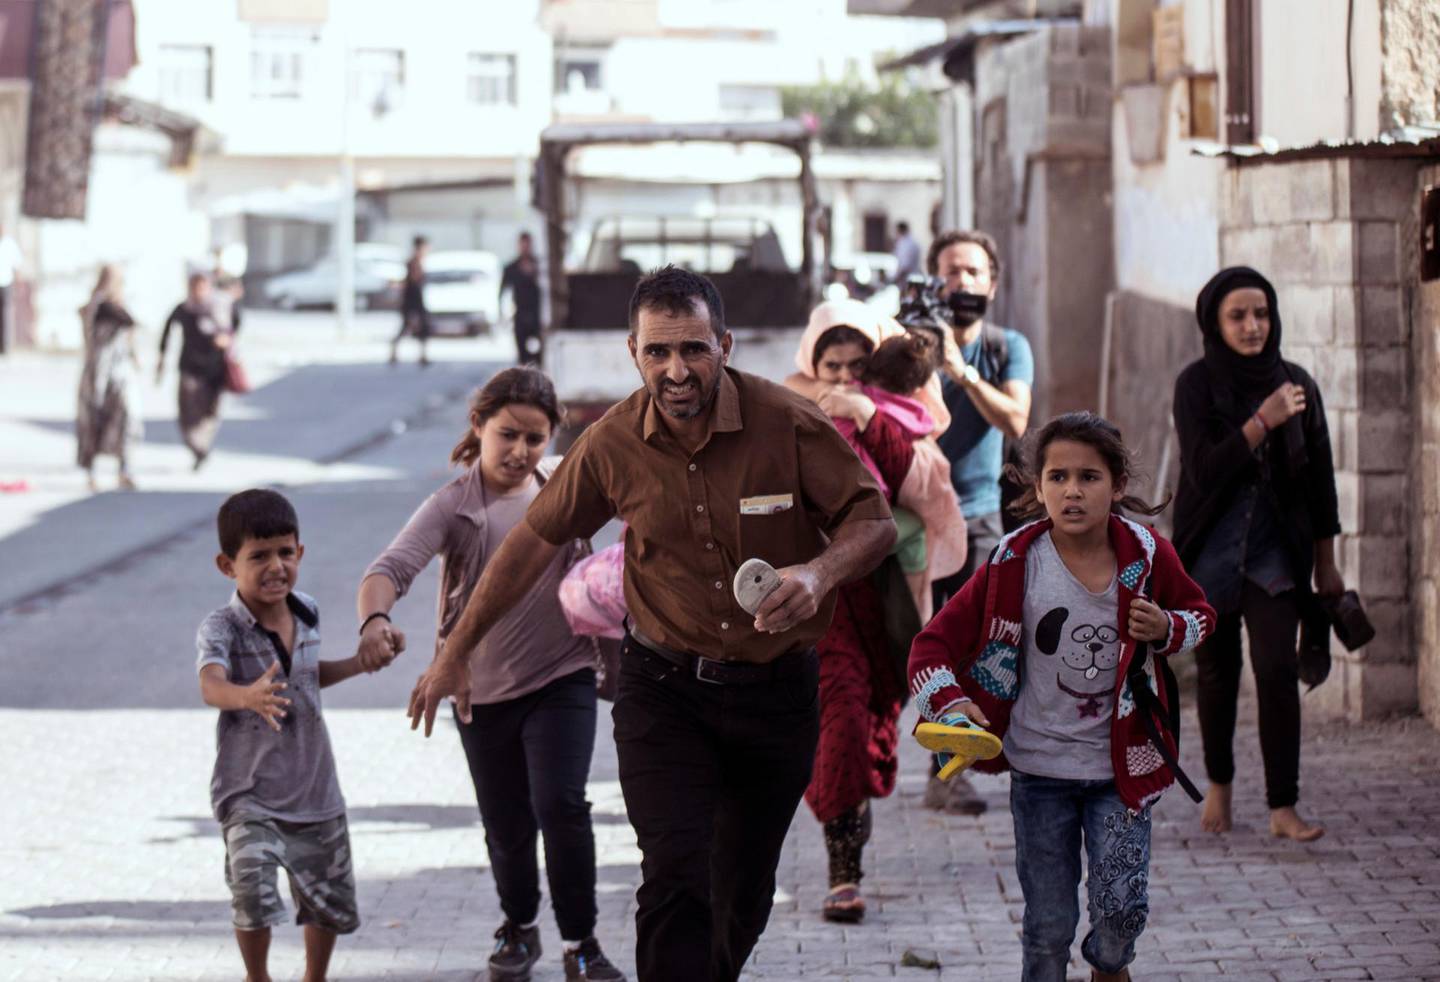 People run to take cover after mortars fired from Syria, in Akcakale, Turkey, Thursday, Oct. 10, 2019. An Associated Press journalist said at least two government buildings were hit by the mortars in Sanliurfa province's border town of Akcakale and at least two people were wounded. (Ismail Coskun/IHA via AP )